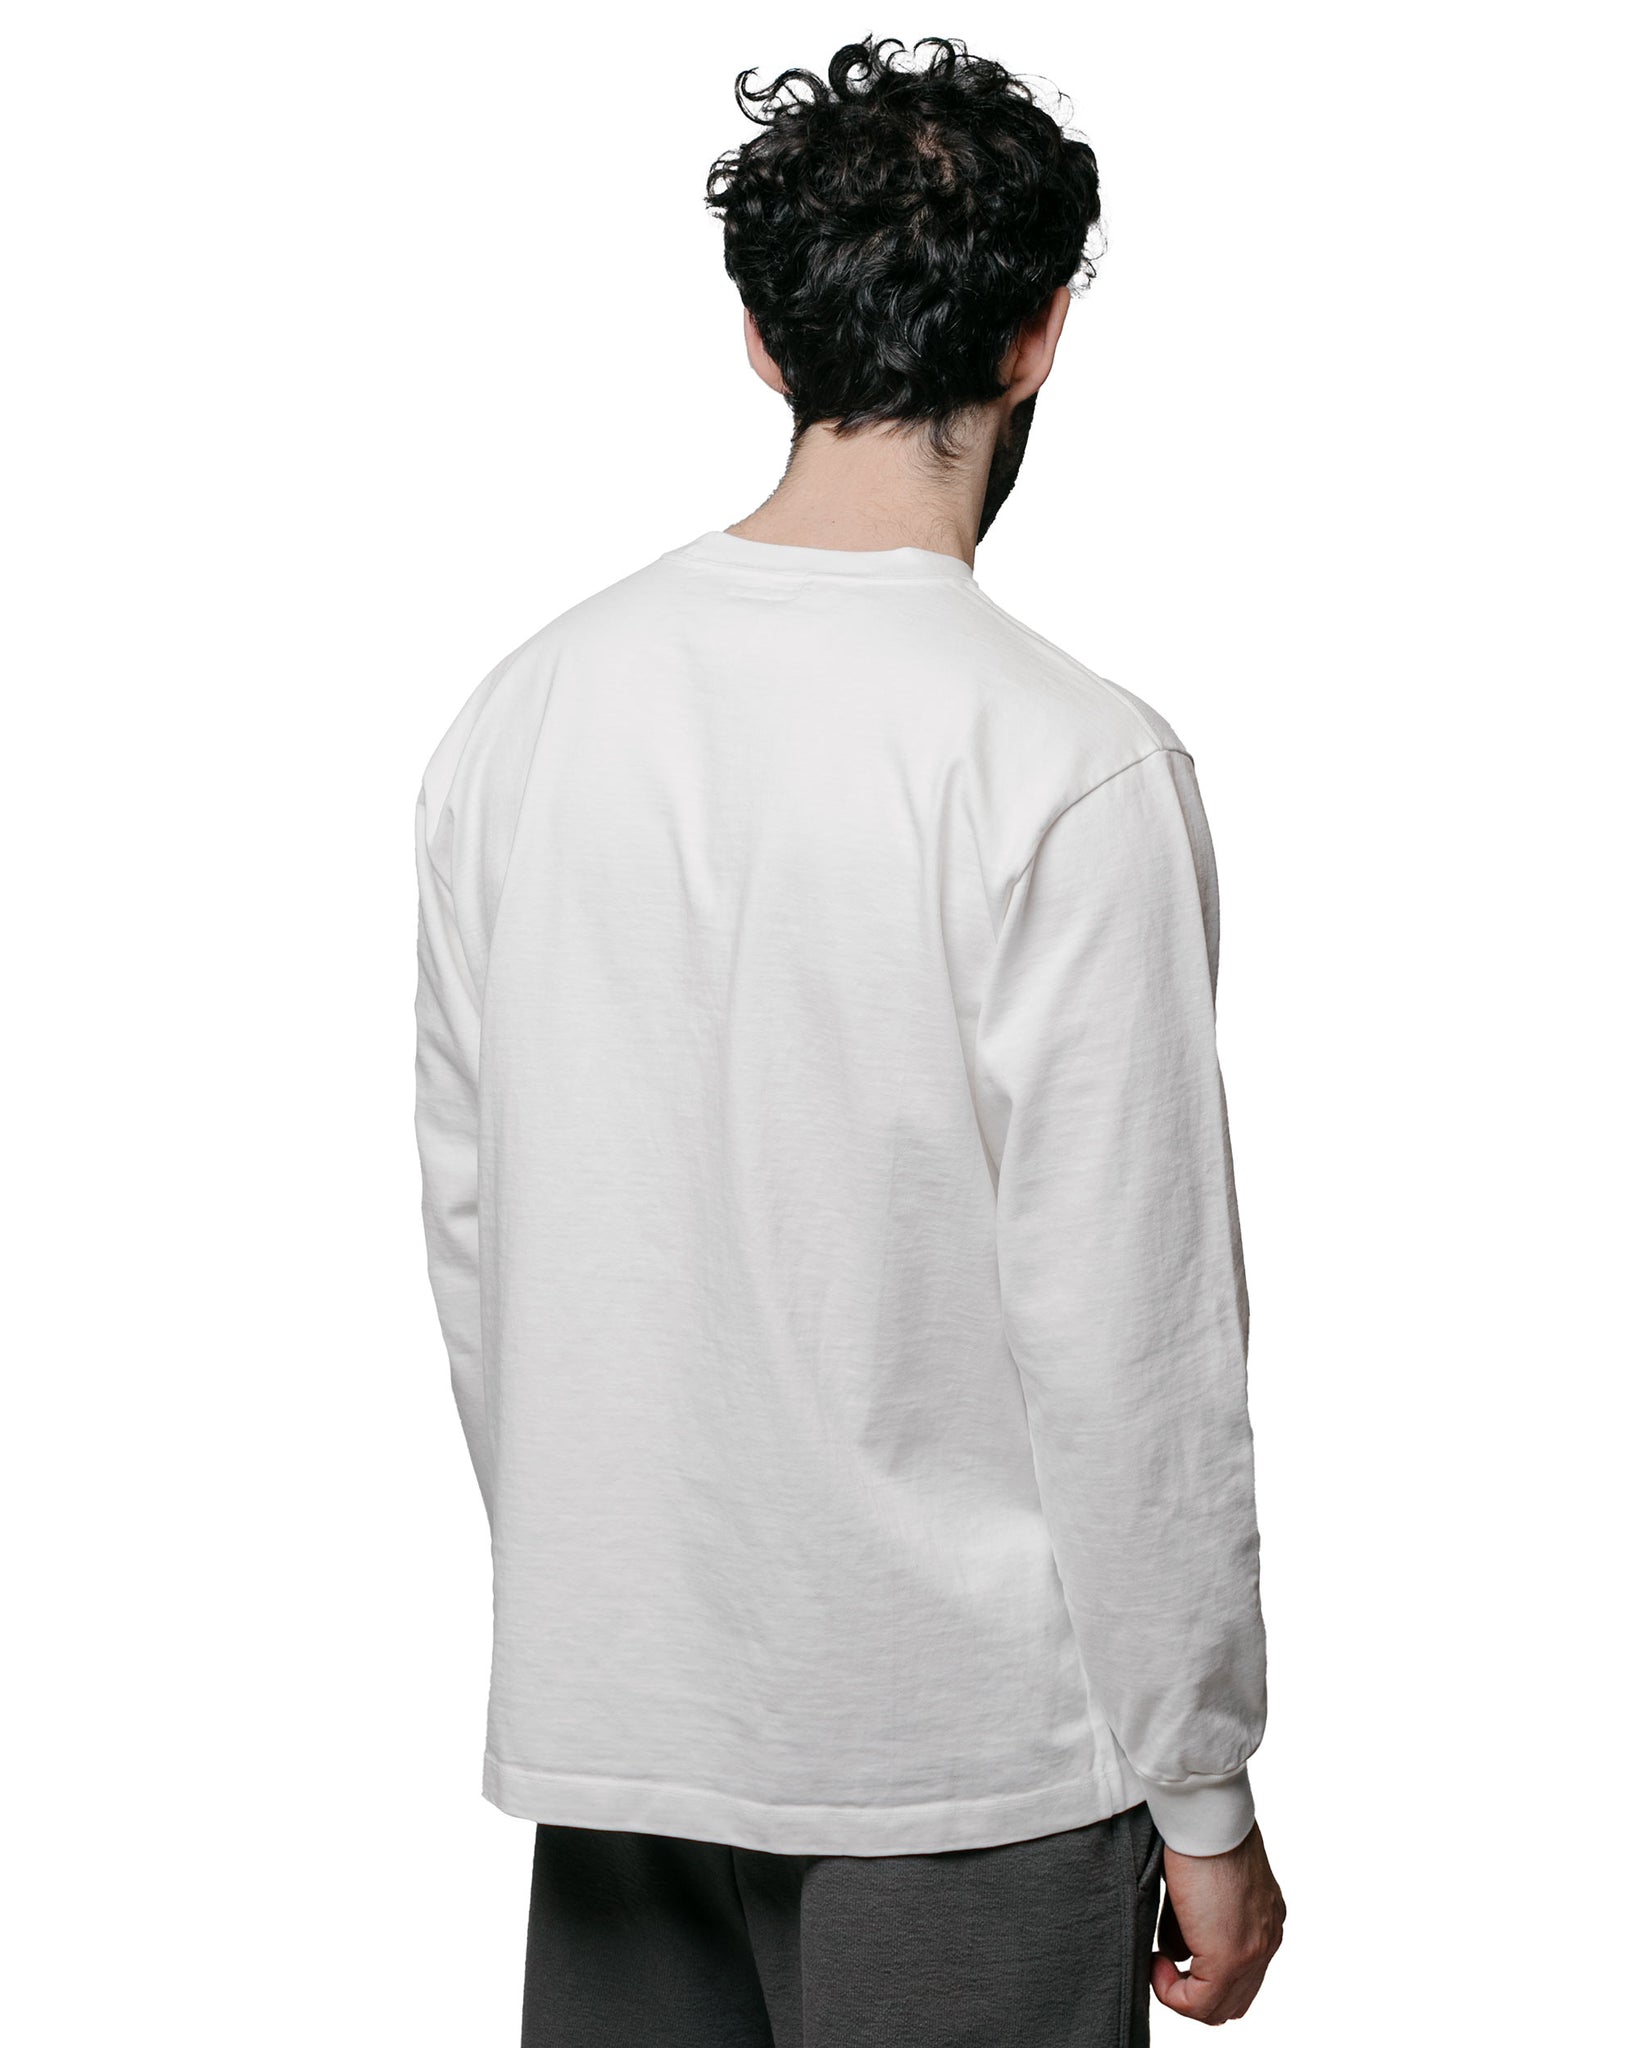 Lady White Co. L/S Rugby T-Shirt White model back